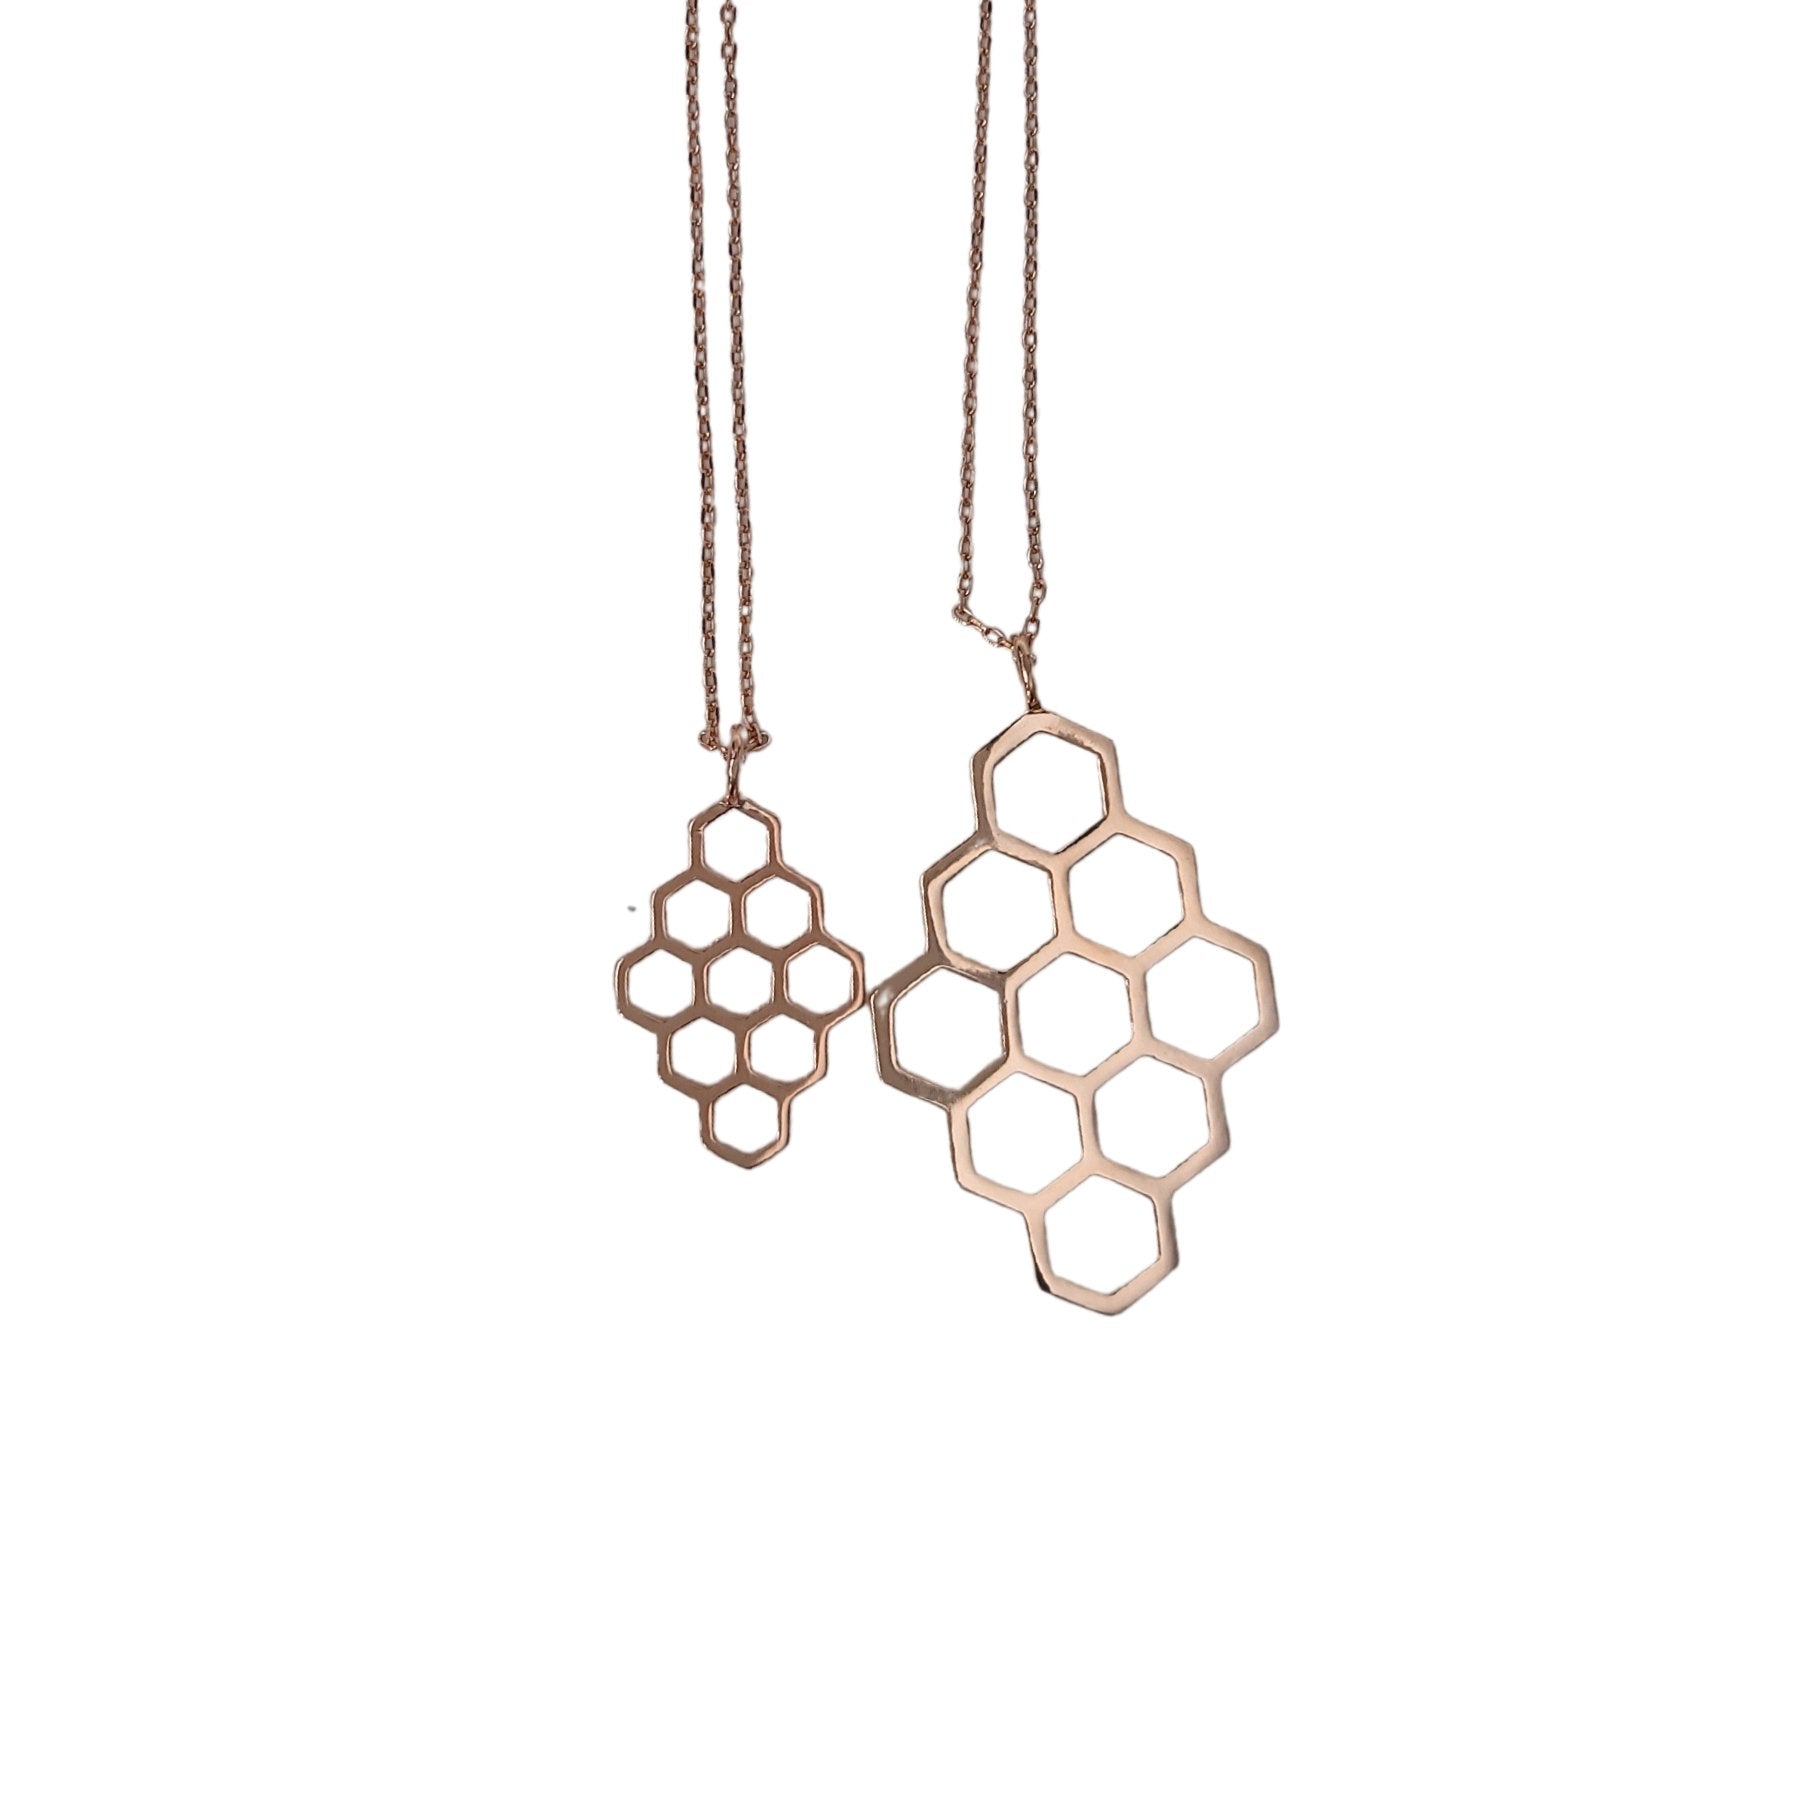 side by side size comaprison of Honeycomb and Petite Honey comb necklaces in rose gold on matching necklace chains